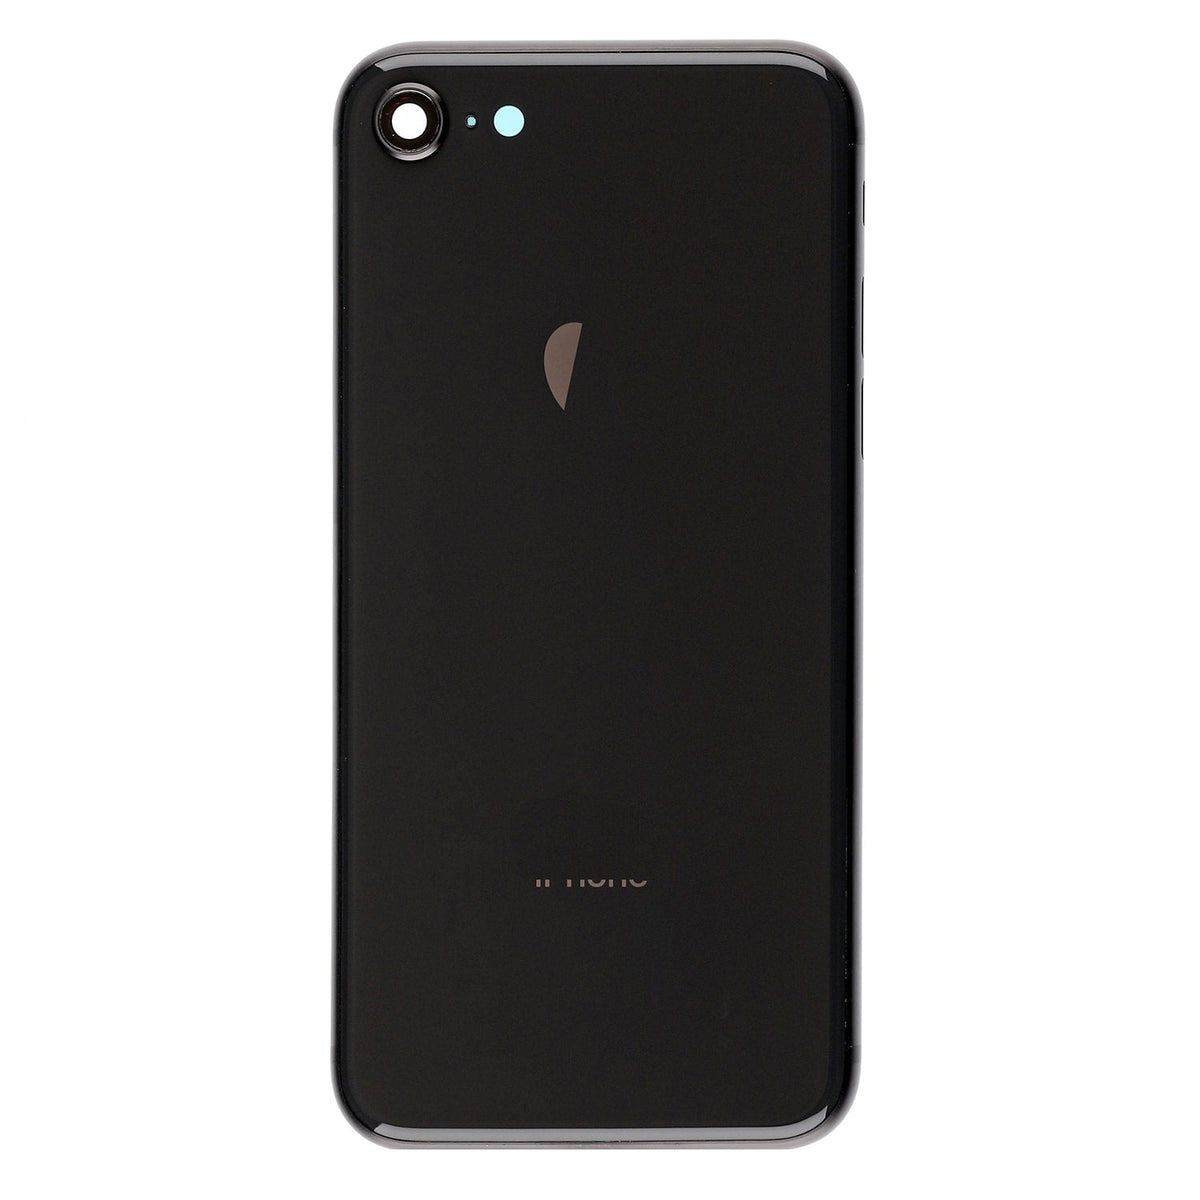 SPACE GRAY BACK COVER WITH FRAME ASSEMBLY FOR IPHONE 8